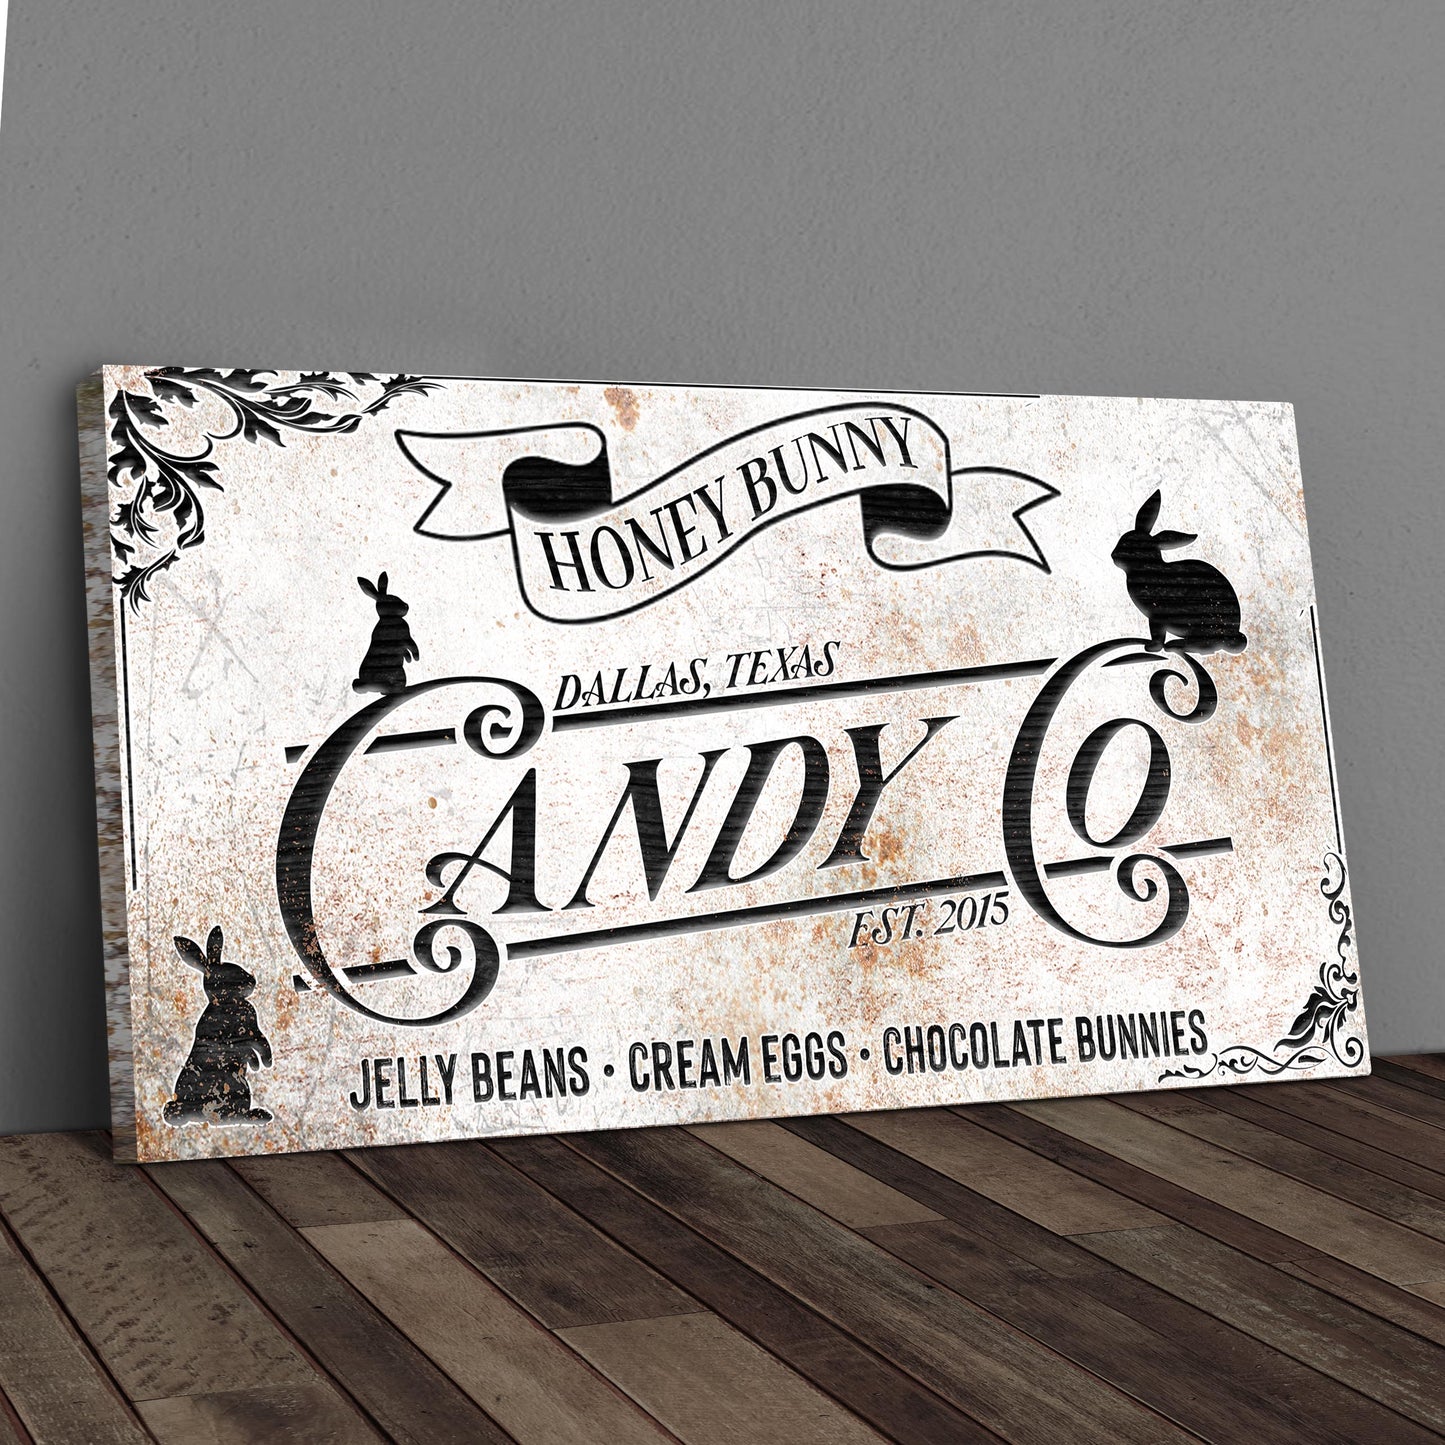 Honey Bunny Candy Company Sign  - Image by Tailored Canvases